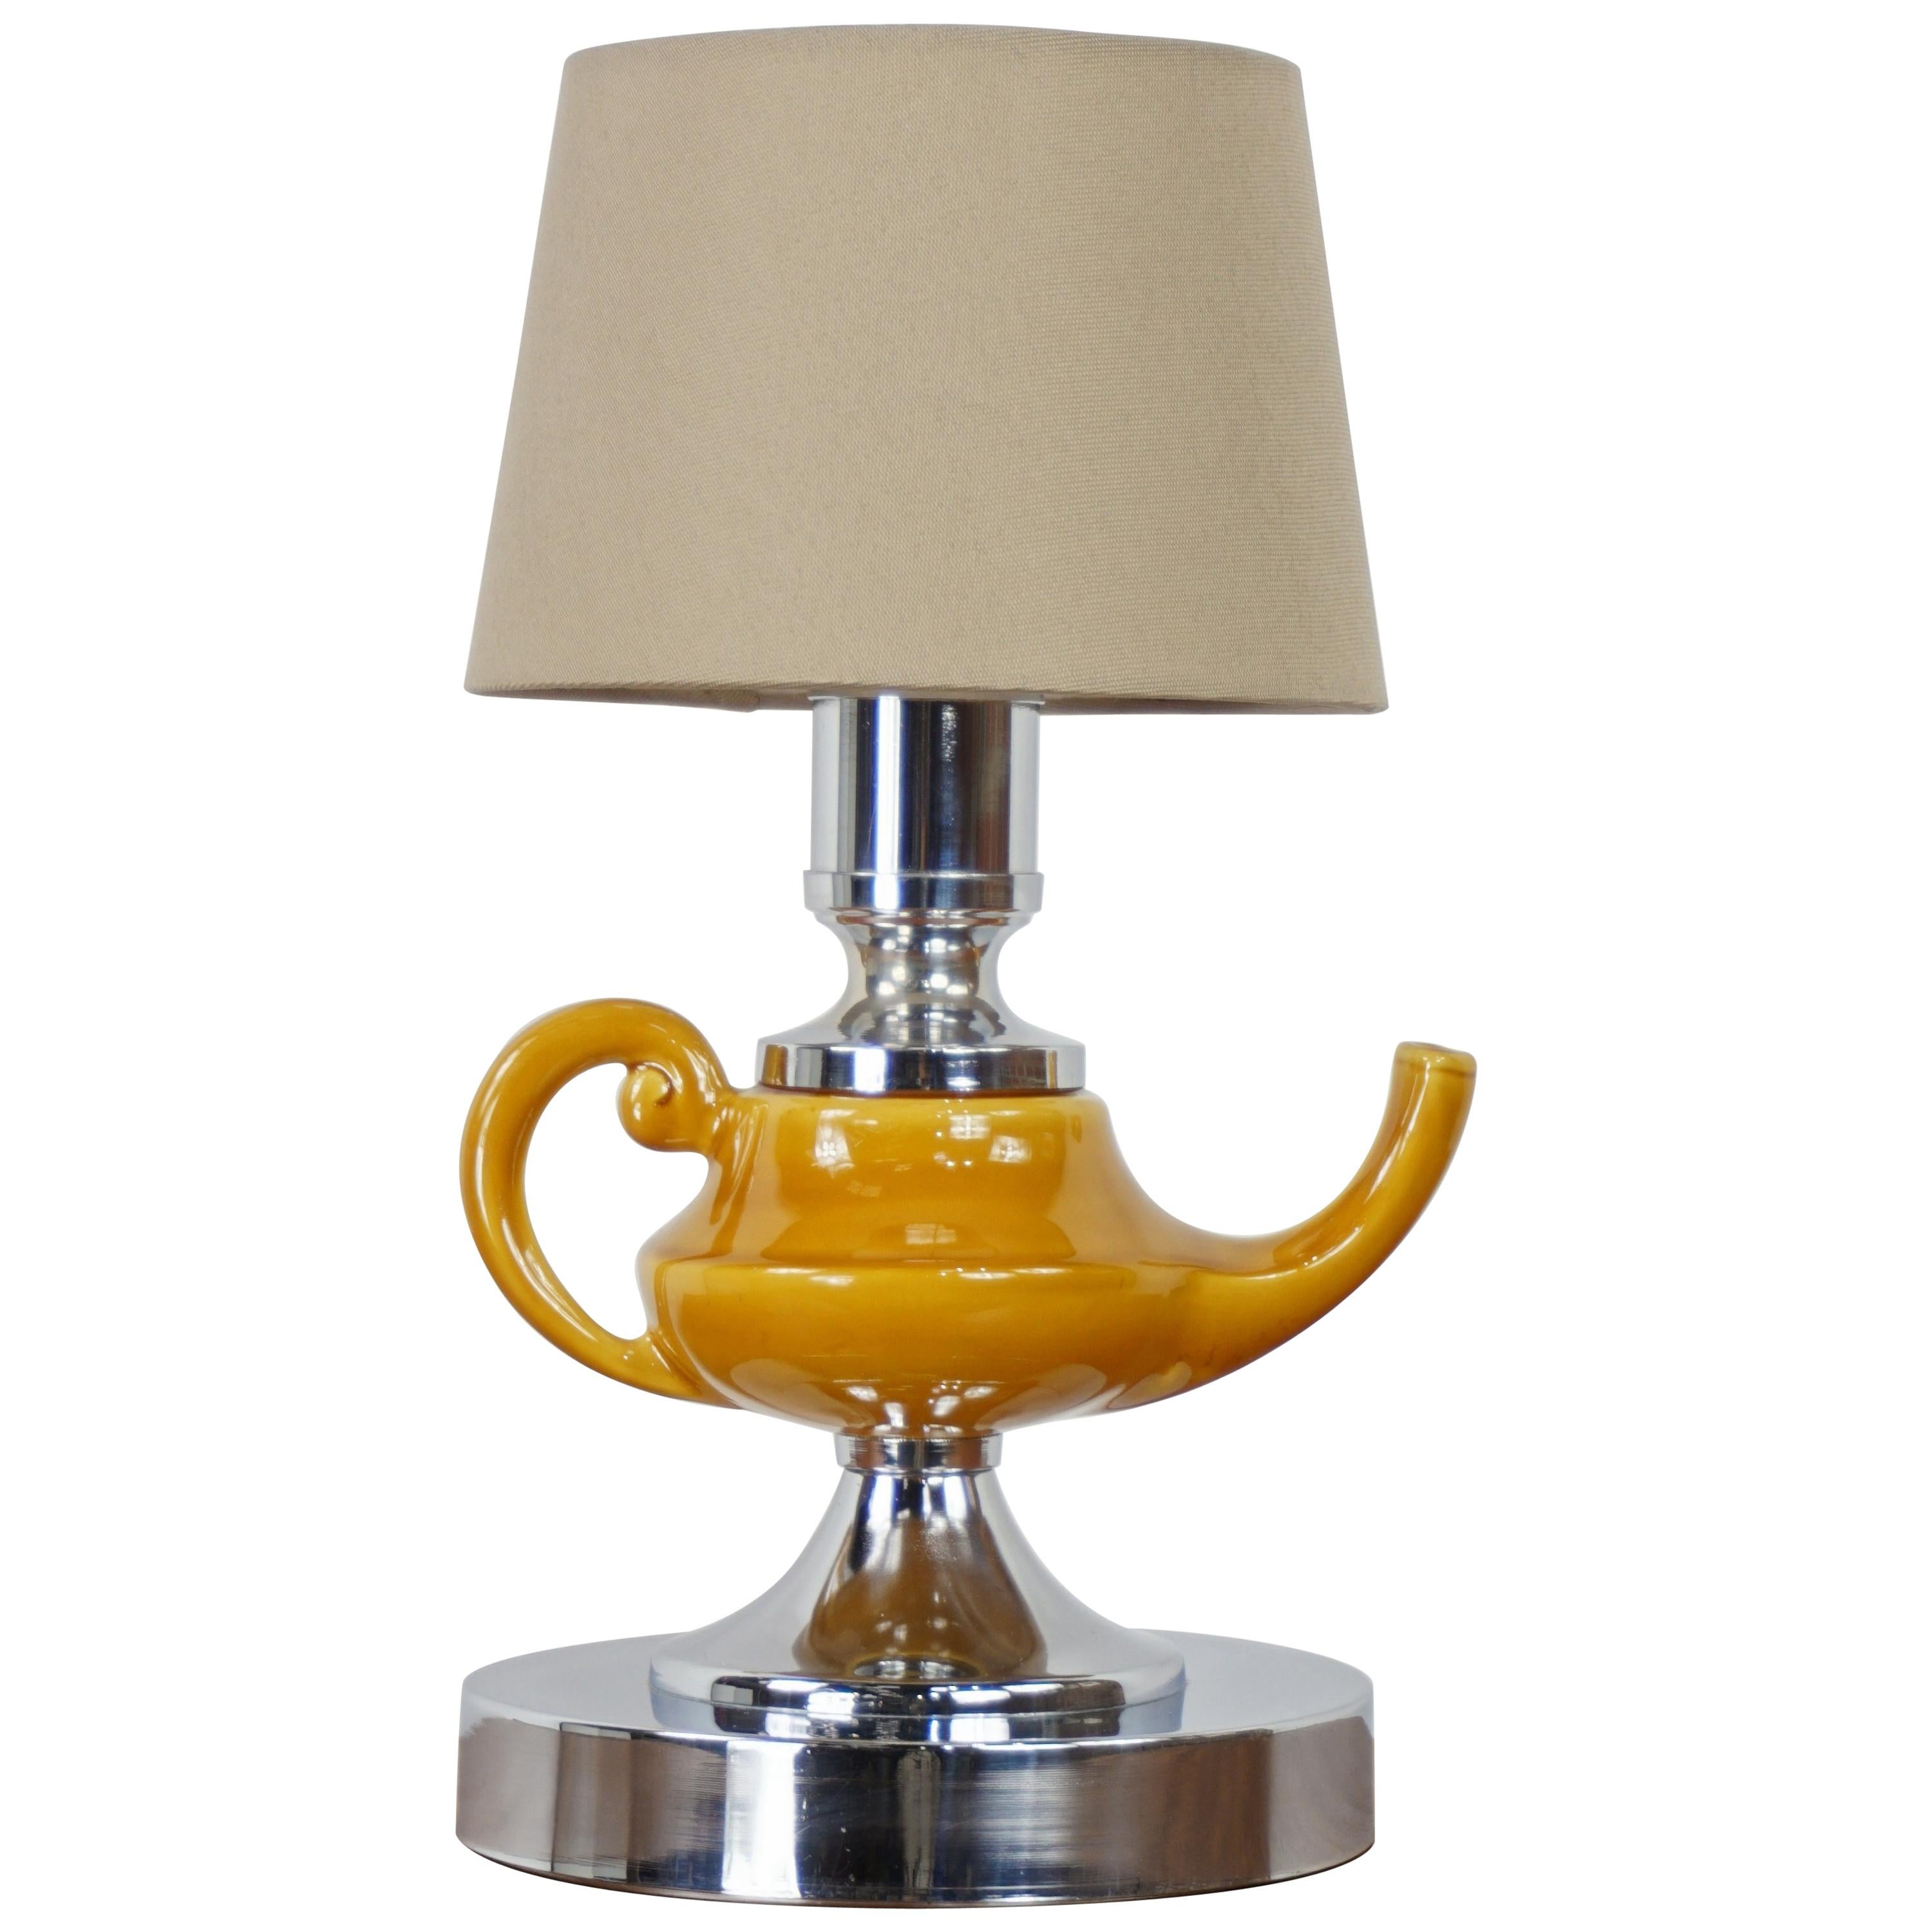 Ceramic and Chrome Génie Lamp from the 1970s